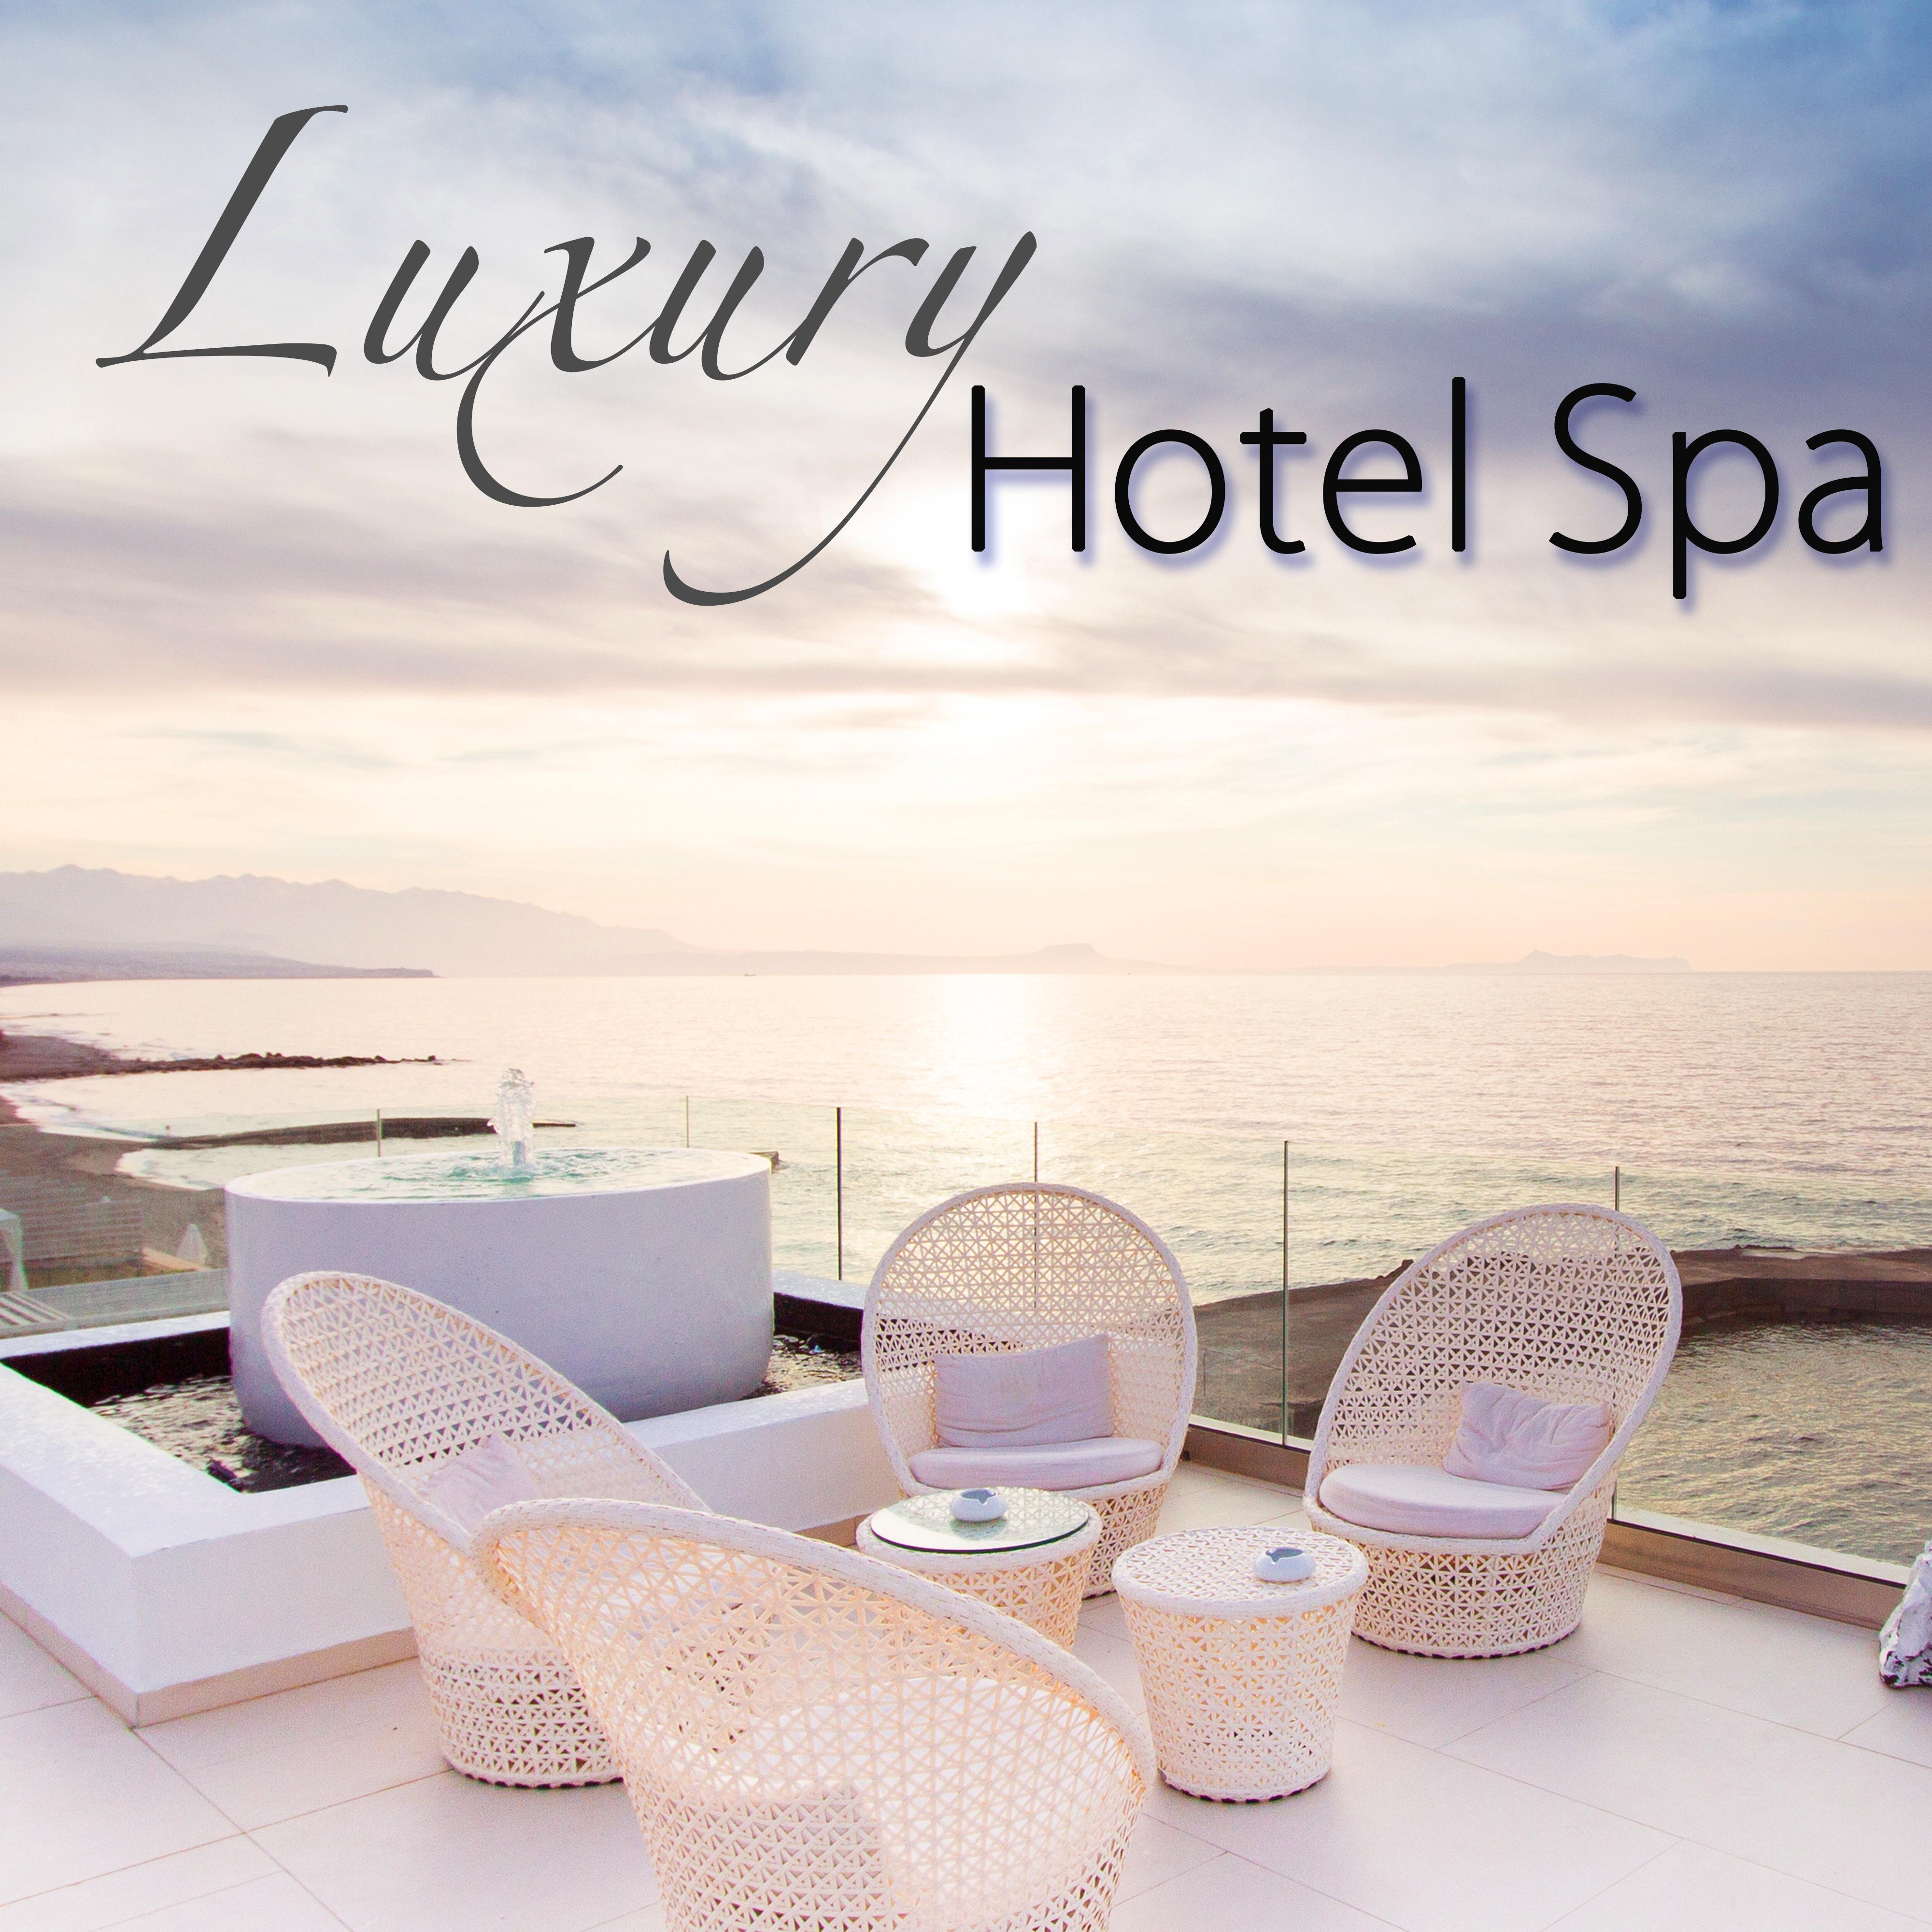 Luxury Hotel Spa  Soothing Sounds for Massage, Spa Treatments, Deep Relaxation  Wellness